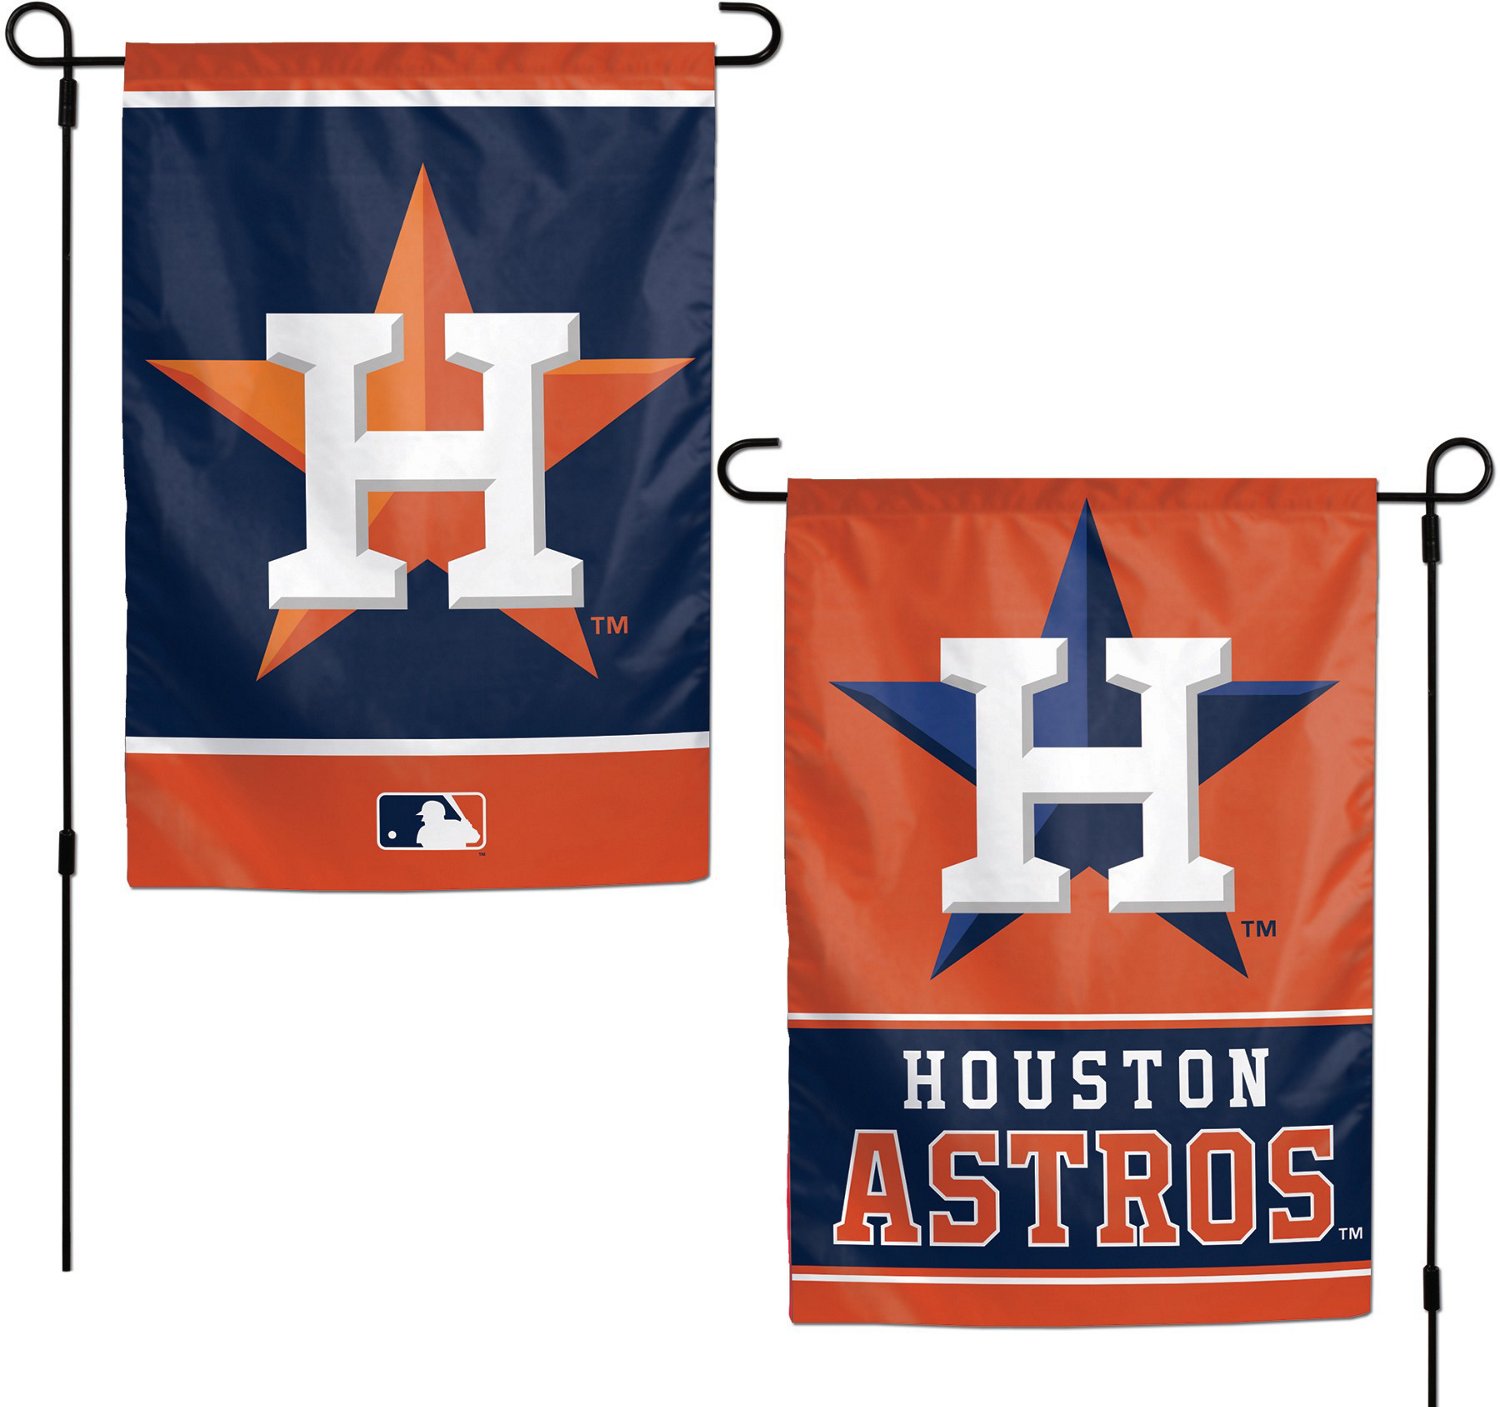 Academy Sports and Outdoors opens for fans to buy Astros championship gear, Advosports